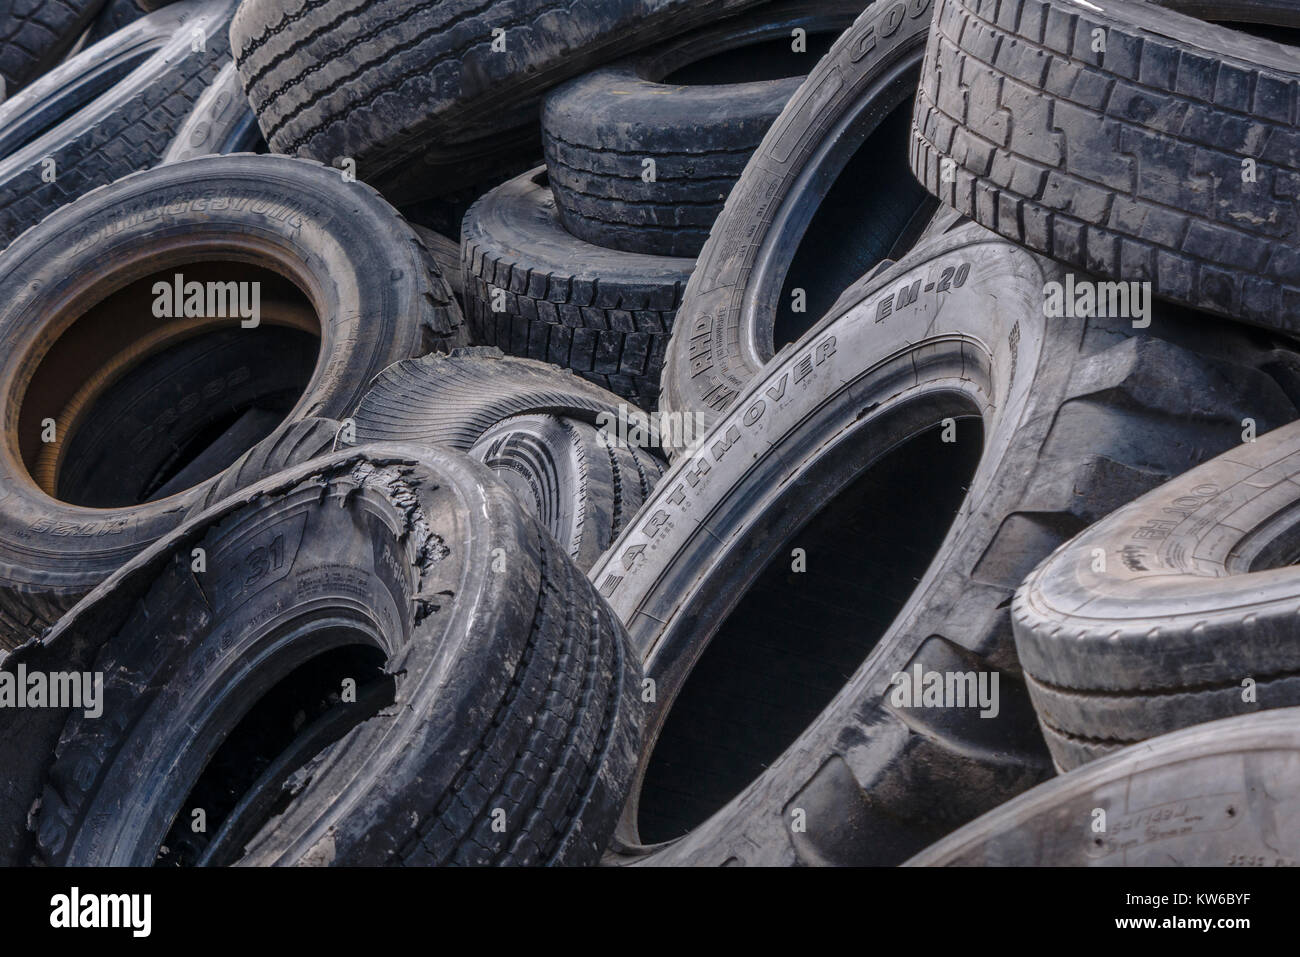 Pile of worn vehicle tryes ready for recycling Stock Photo